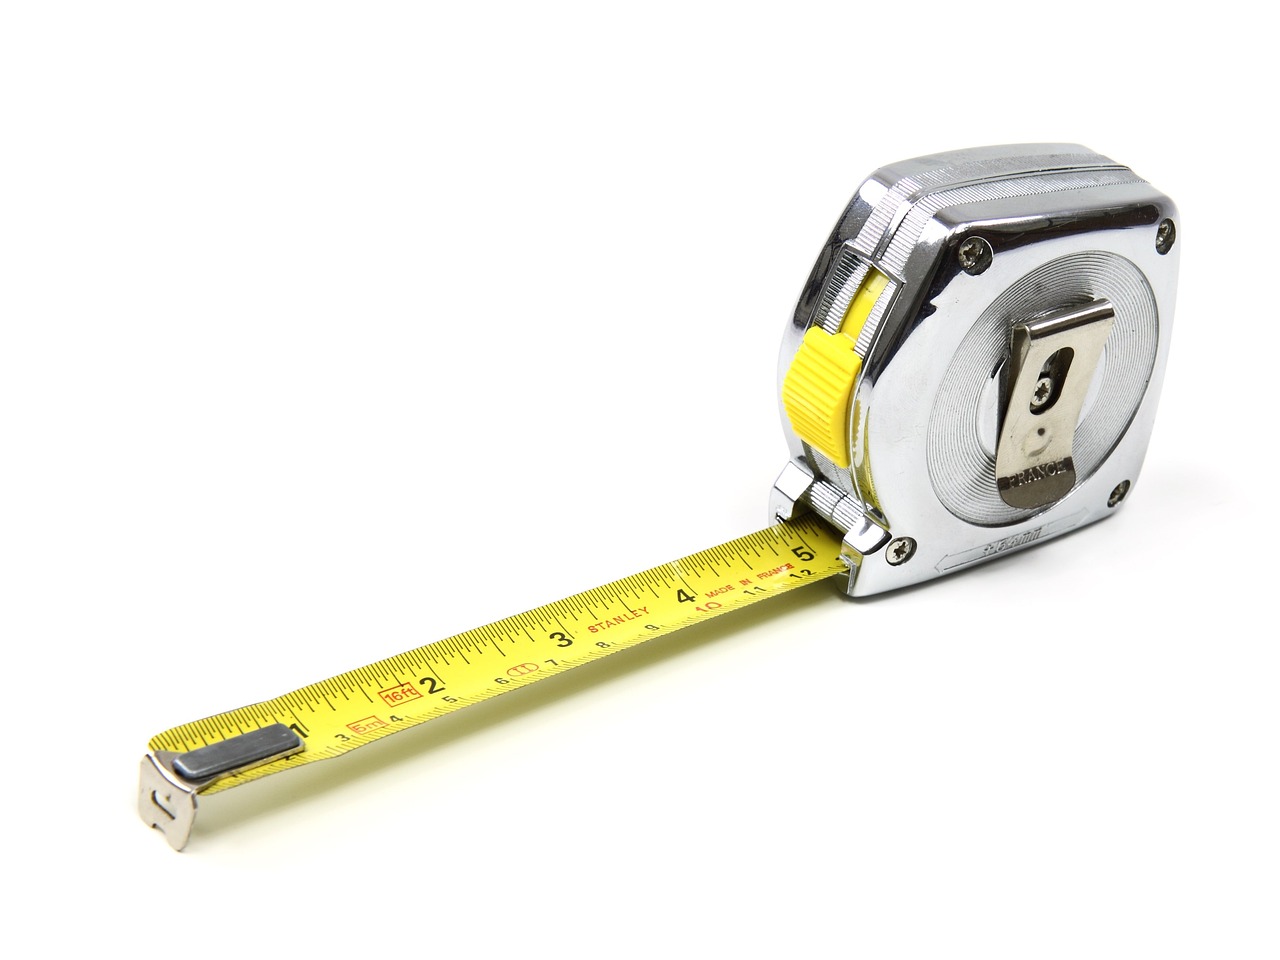 EDC Tape Measure: Going the Distance